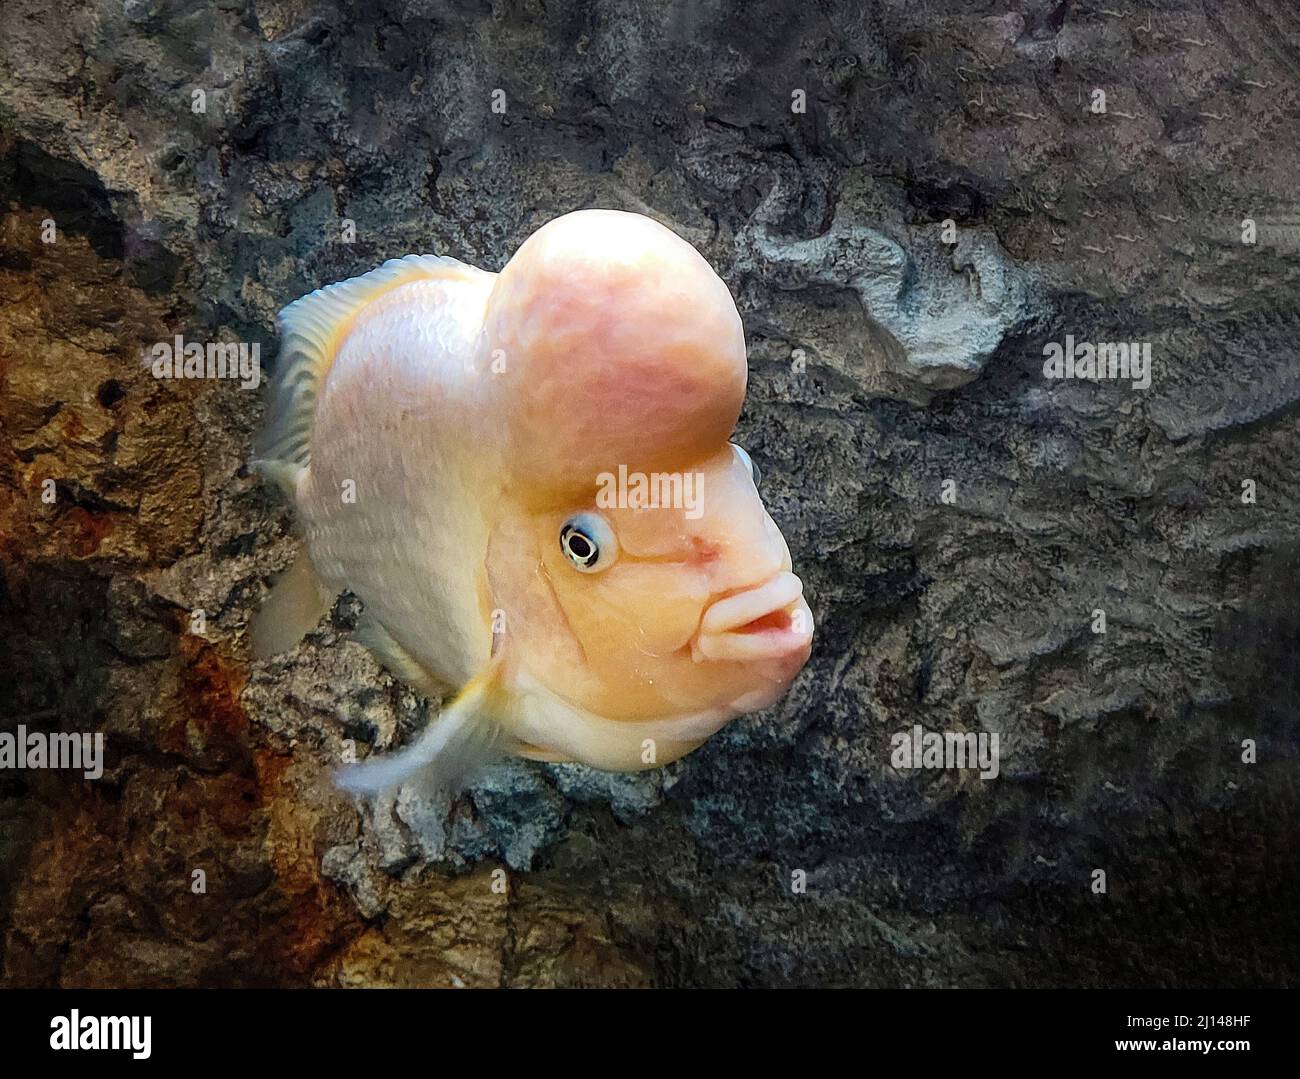 Close up of a flowerhorn fish with dark rock background in an aquarium Stock Photo